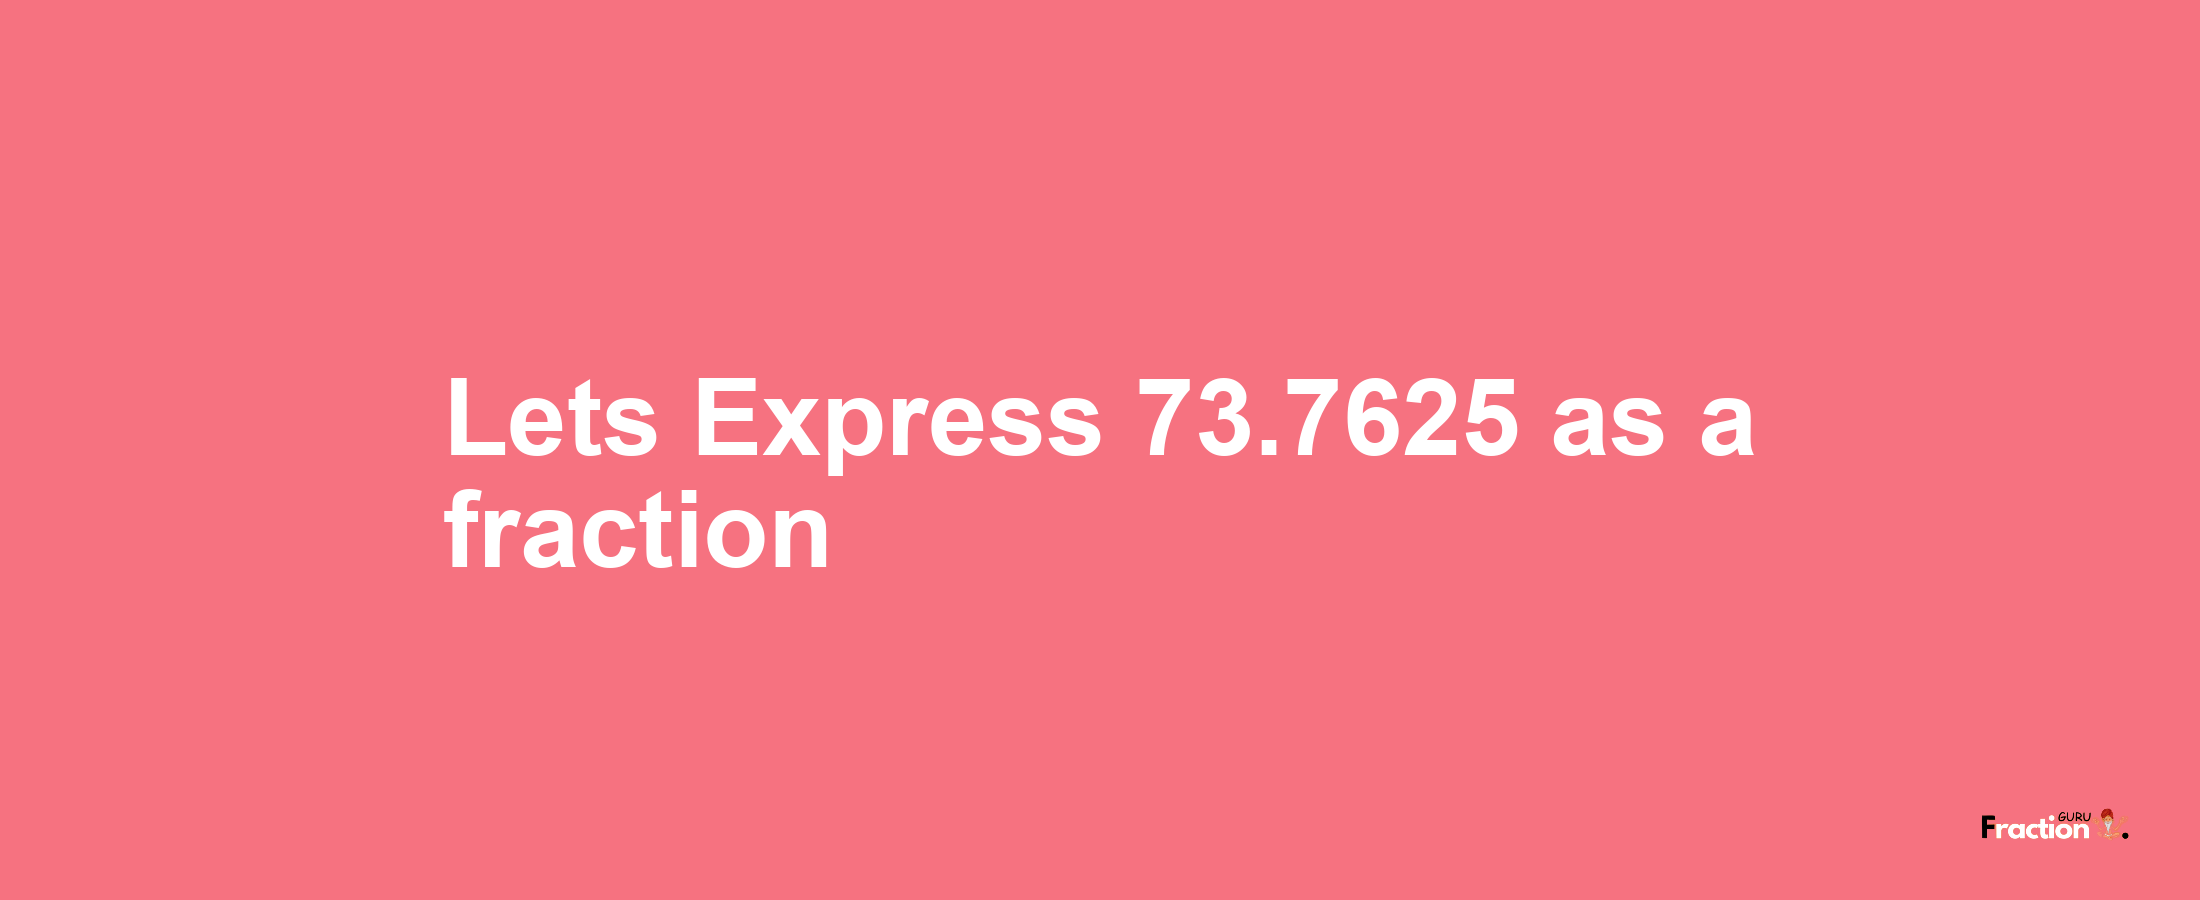 Lets Express 73.7625 as afraction